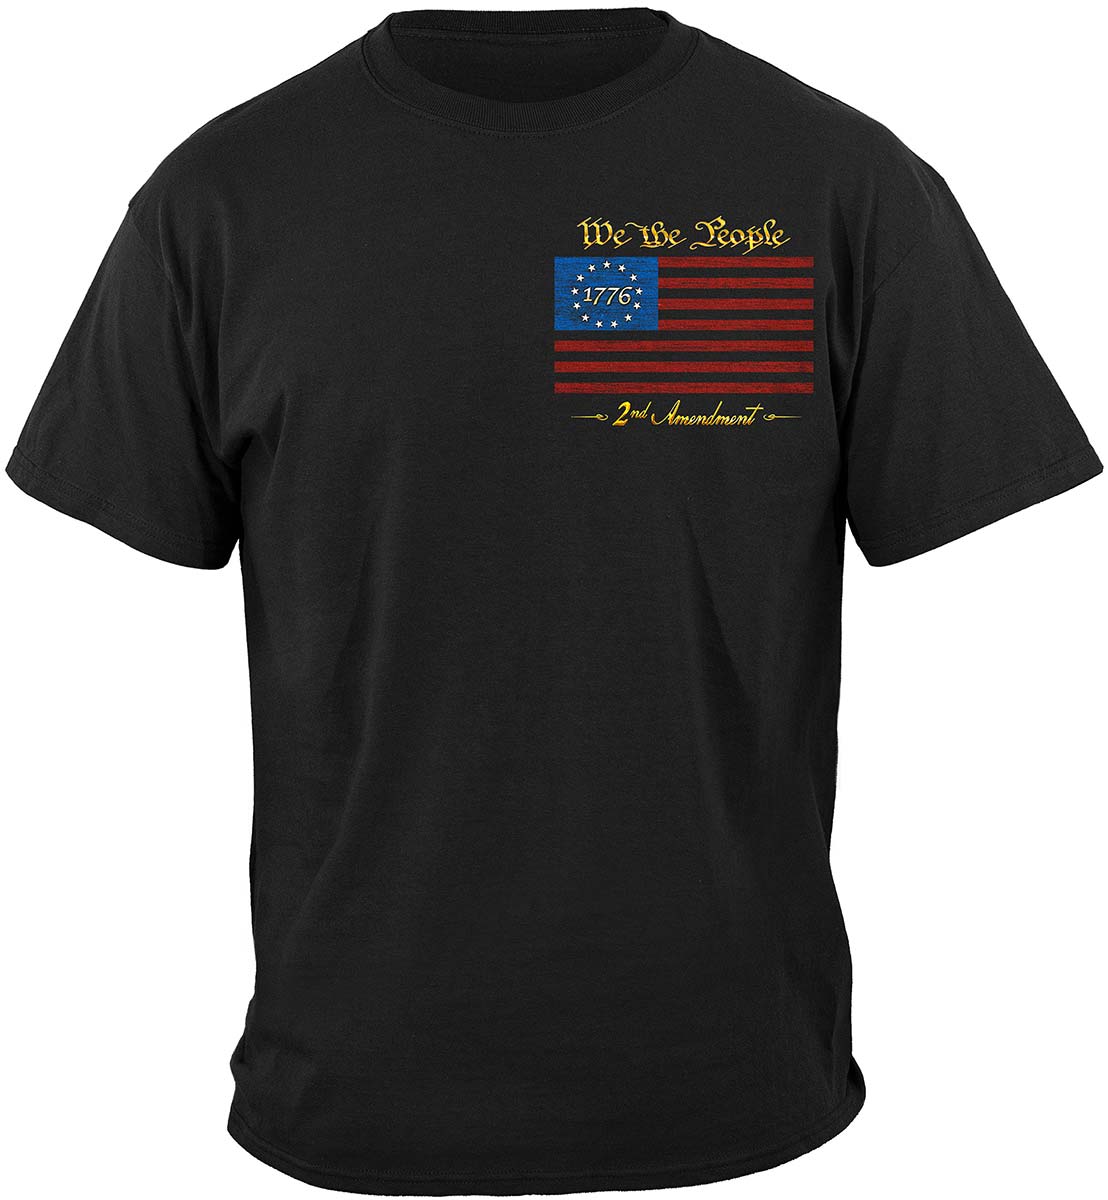 2nd Amendment Betsy Ross Flag We the People Premium T-SHIRT